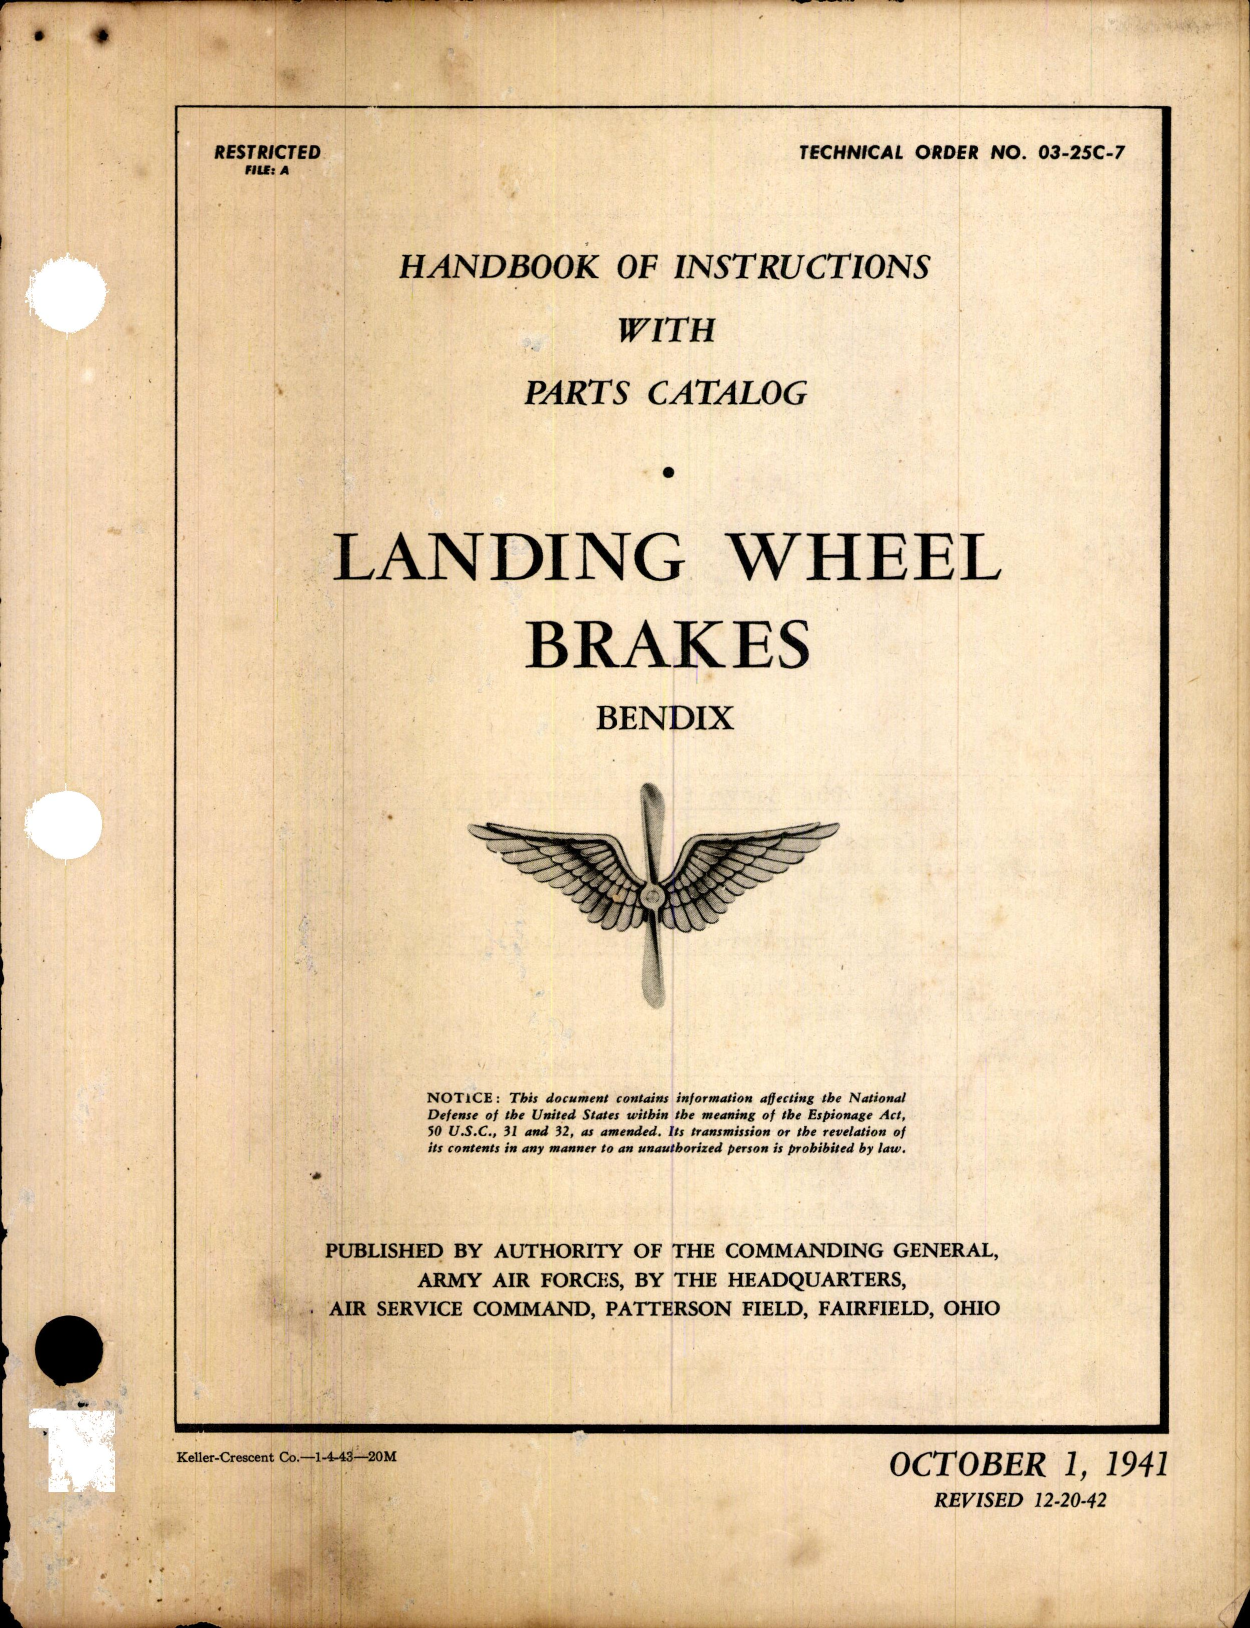 Sample page 3 from AirCorps Library document: Instructions with Parts Catalog for Landing Wheel Brakes